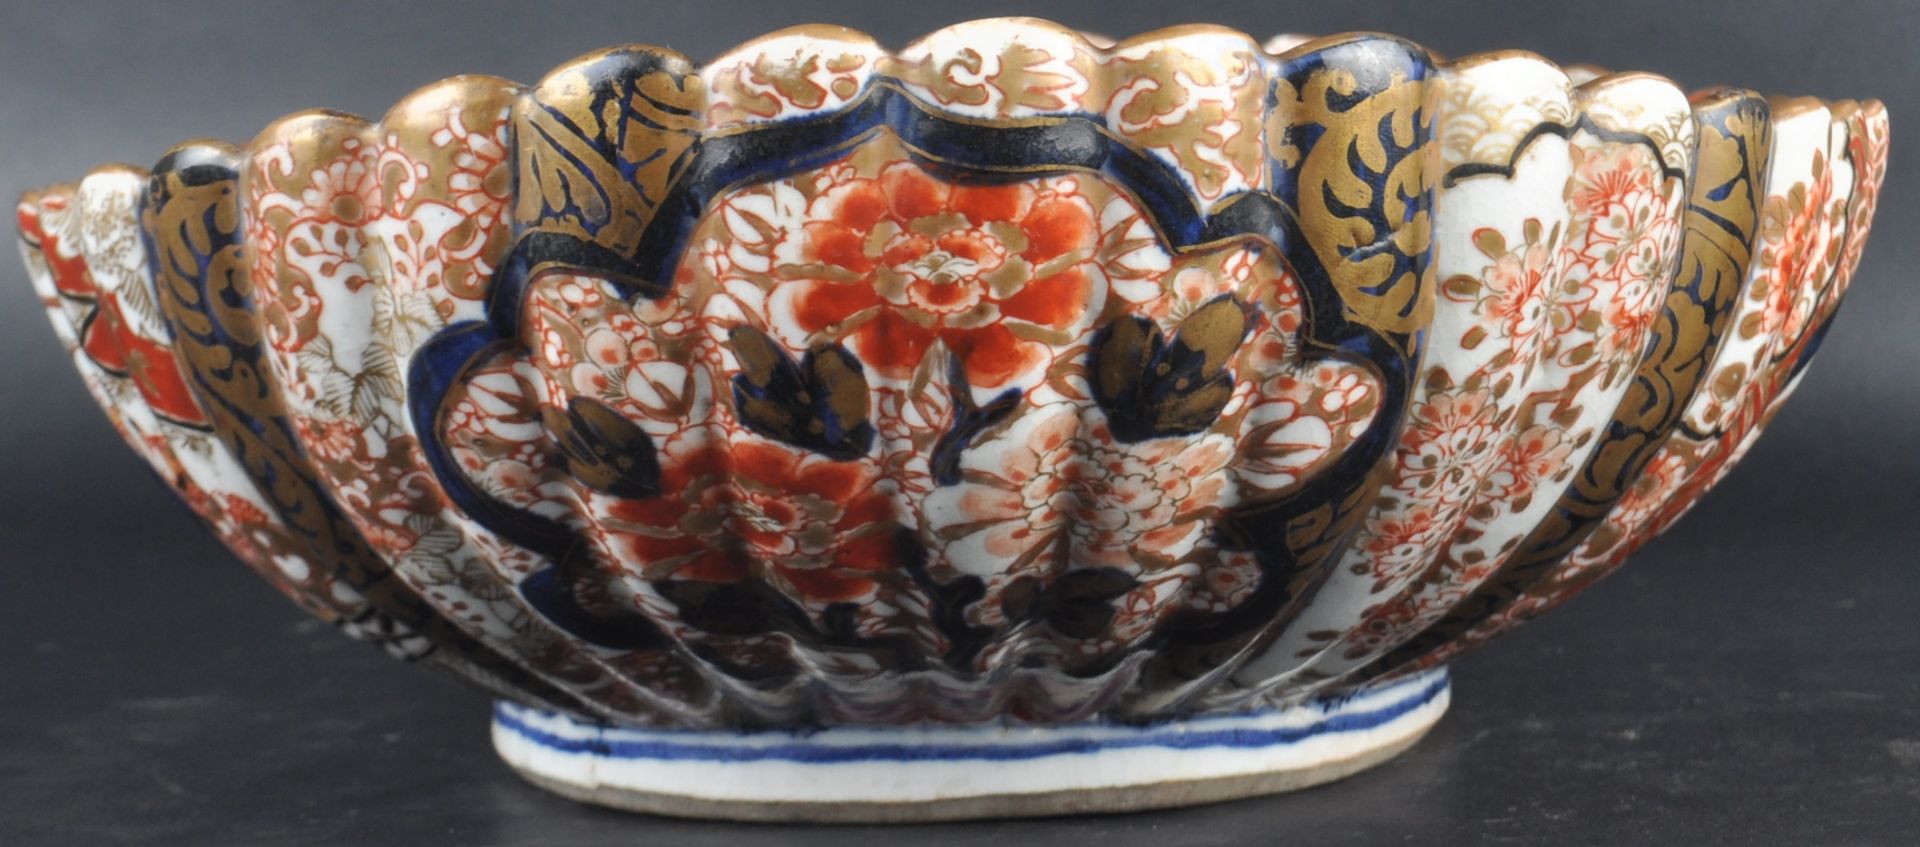 19TH CENTURY JAPANESE MEIJI PERIOD SEGMENTED CHARGER - Image 3 of 7